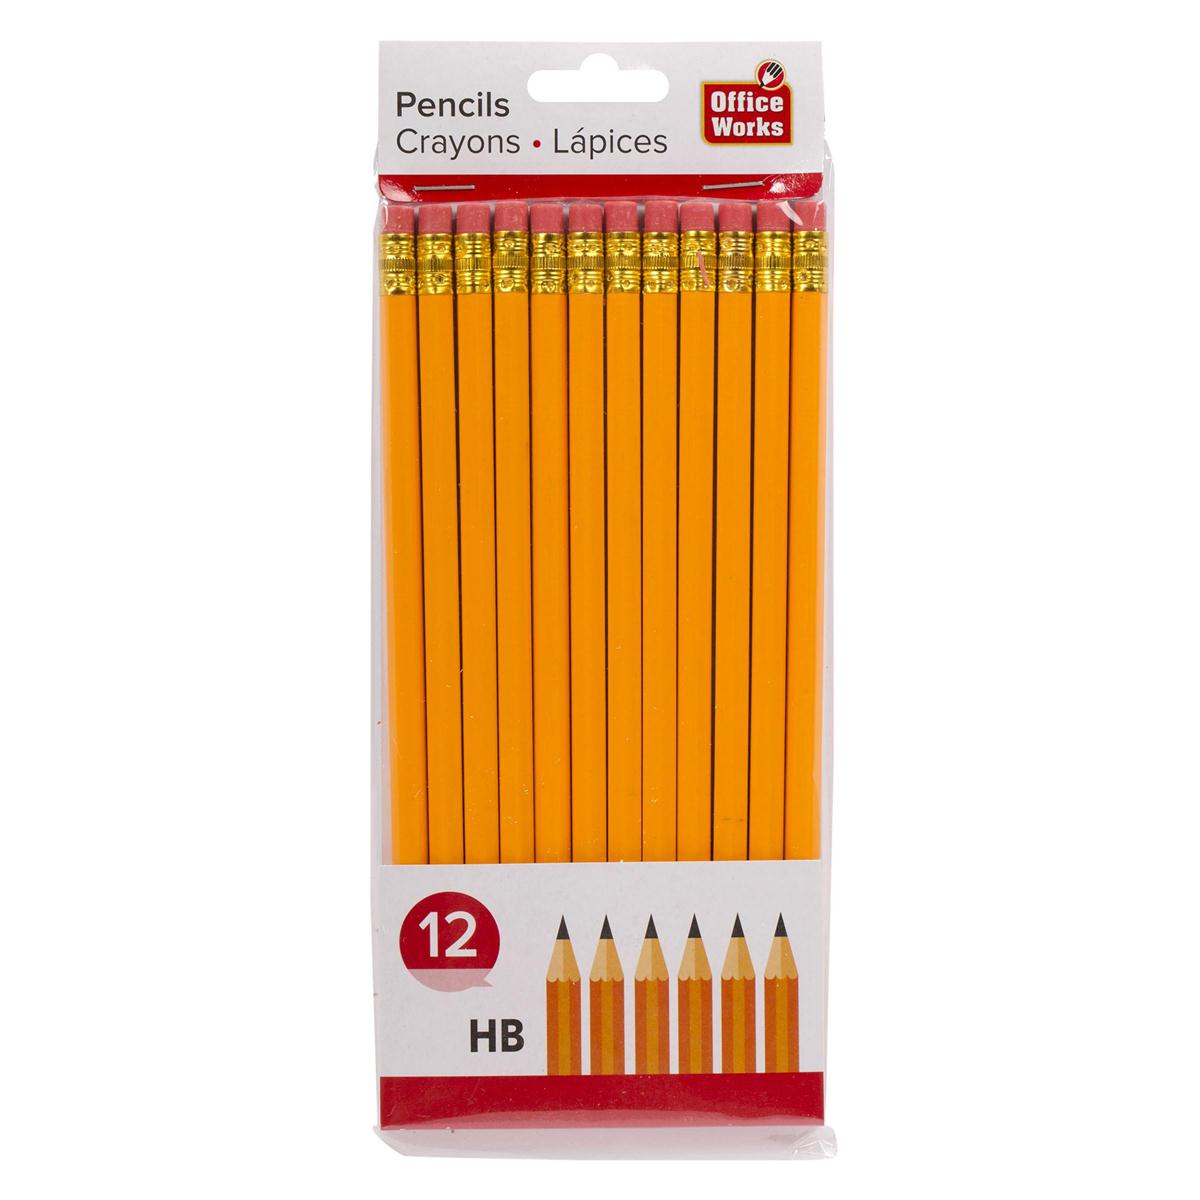 O.WKs. HB Pencil with Eraser, 12-Piece, Packaged in Poly Bag Header